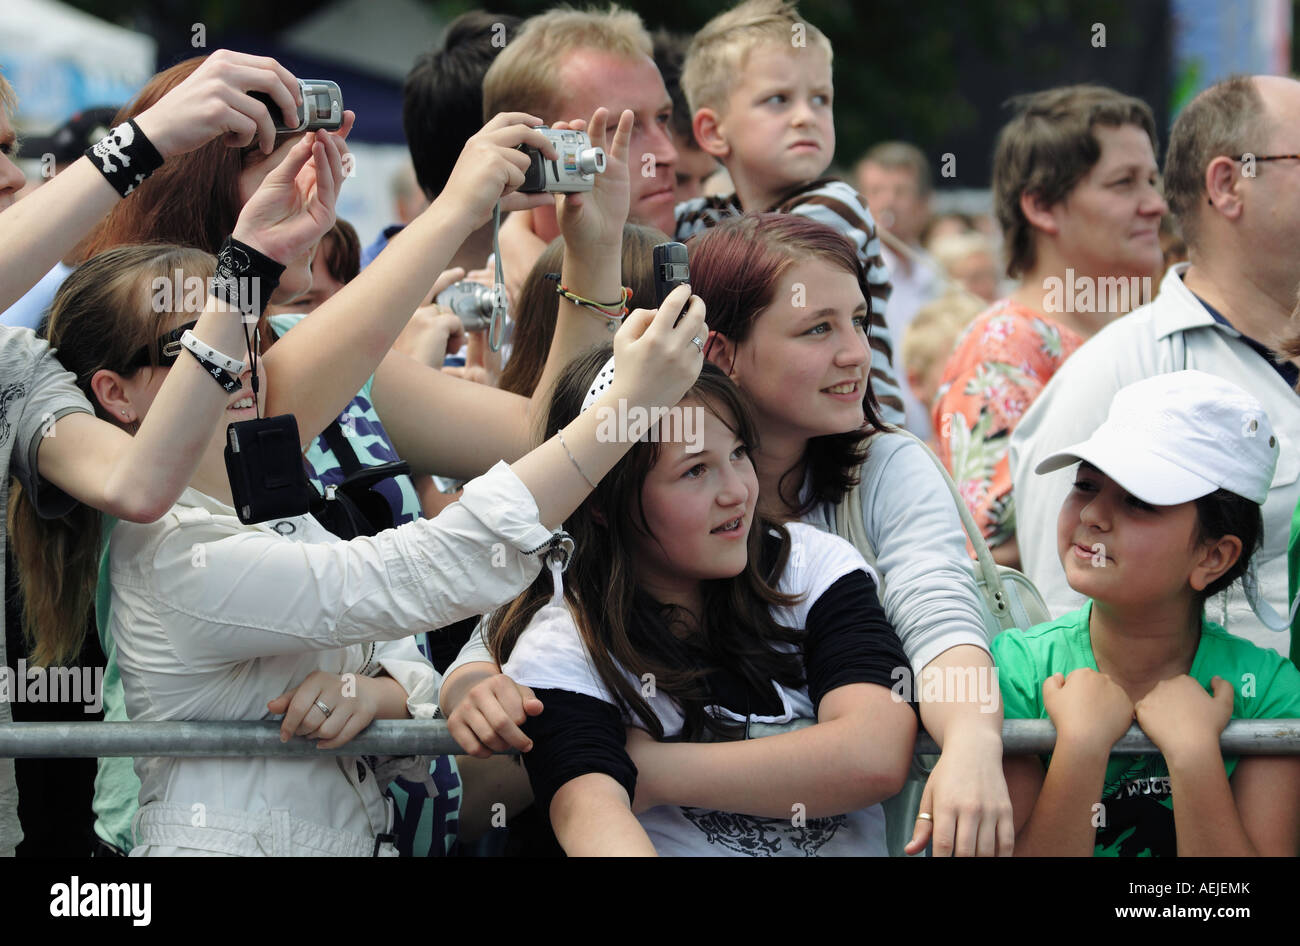 Fans looking curiously and taking pictures Stock Photo